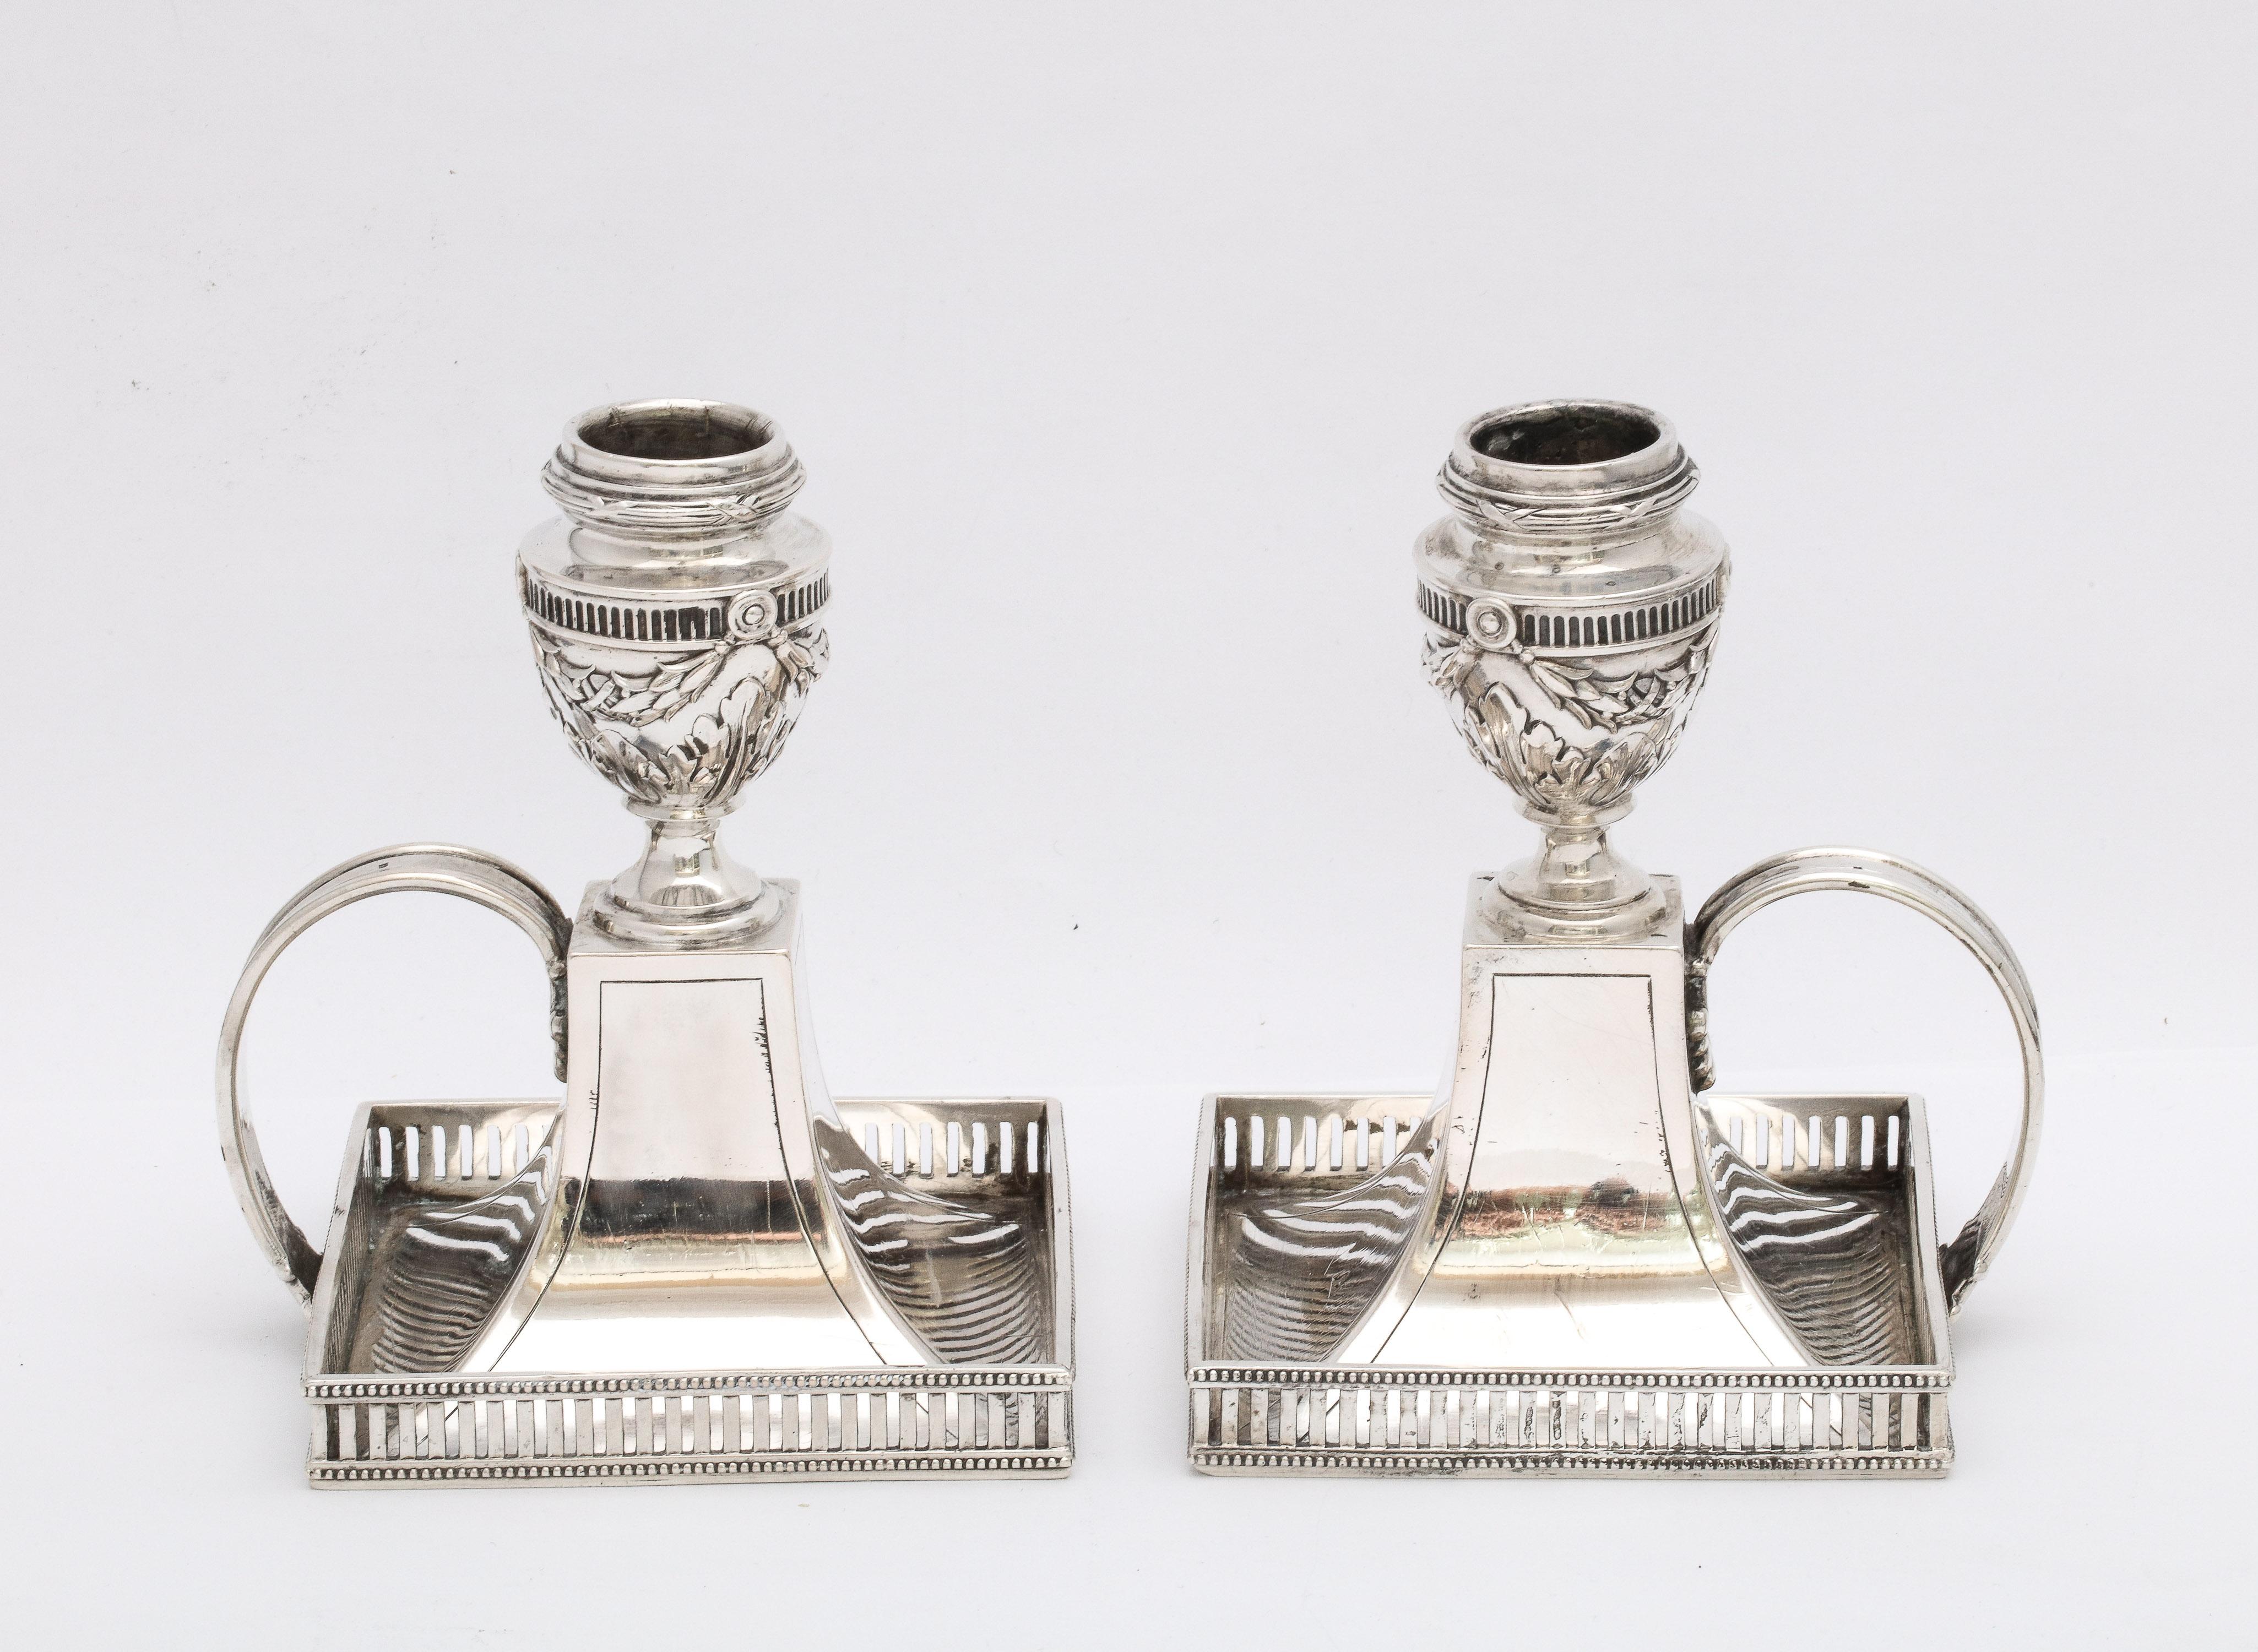 Pair of Neoclassical-style, Continental Silver (.800) chambersticks, Germany, Ca. 1910. Each chamberstick measures 5 inches high x 3 3/4 inches deep x 3 3/4 inches wide x 4 inches from outer edge of handle to outer edge of base. Pierced gallery on